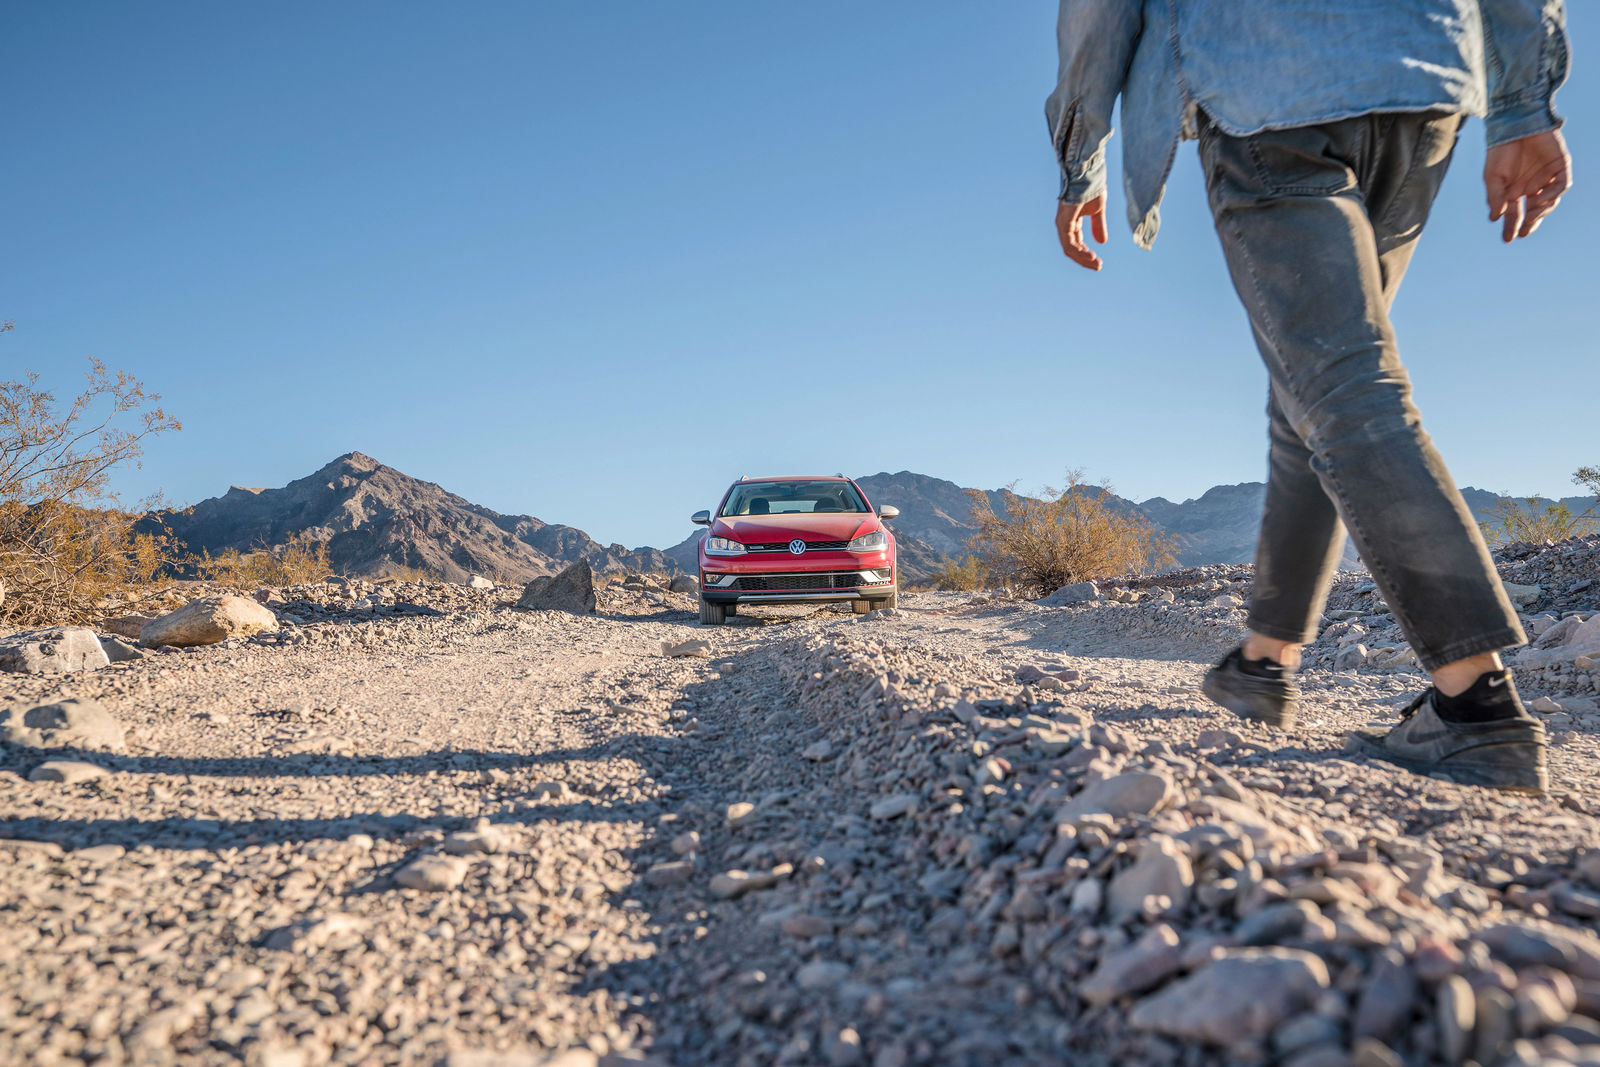 Story: With the Golf Alltrack through Death Valley